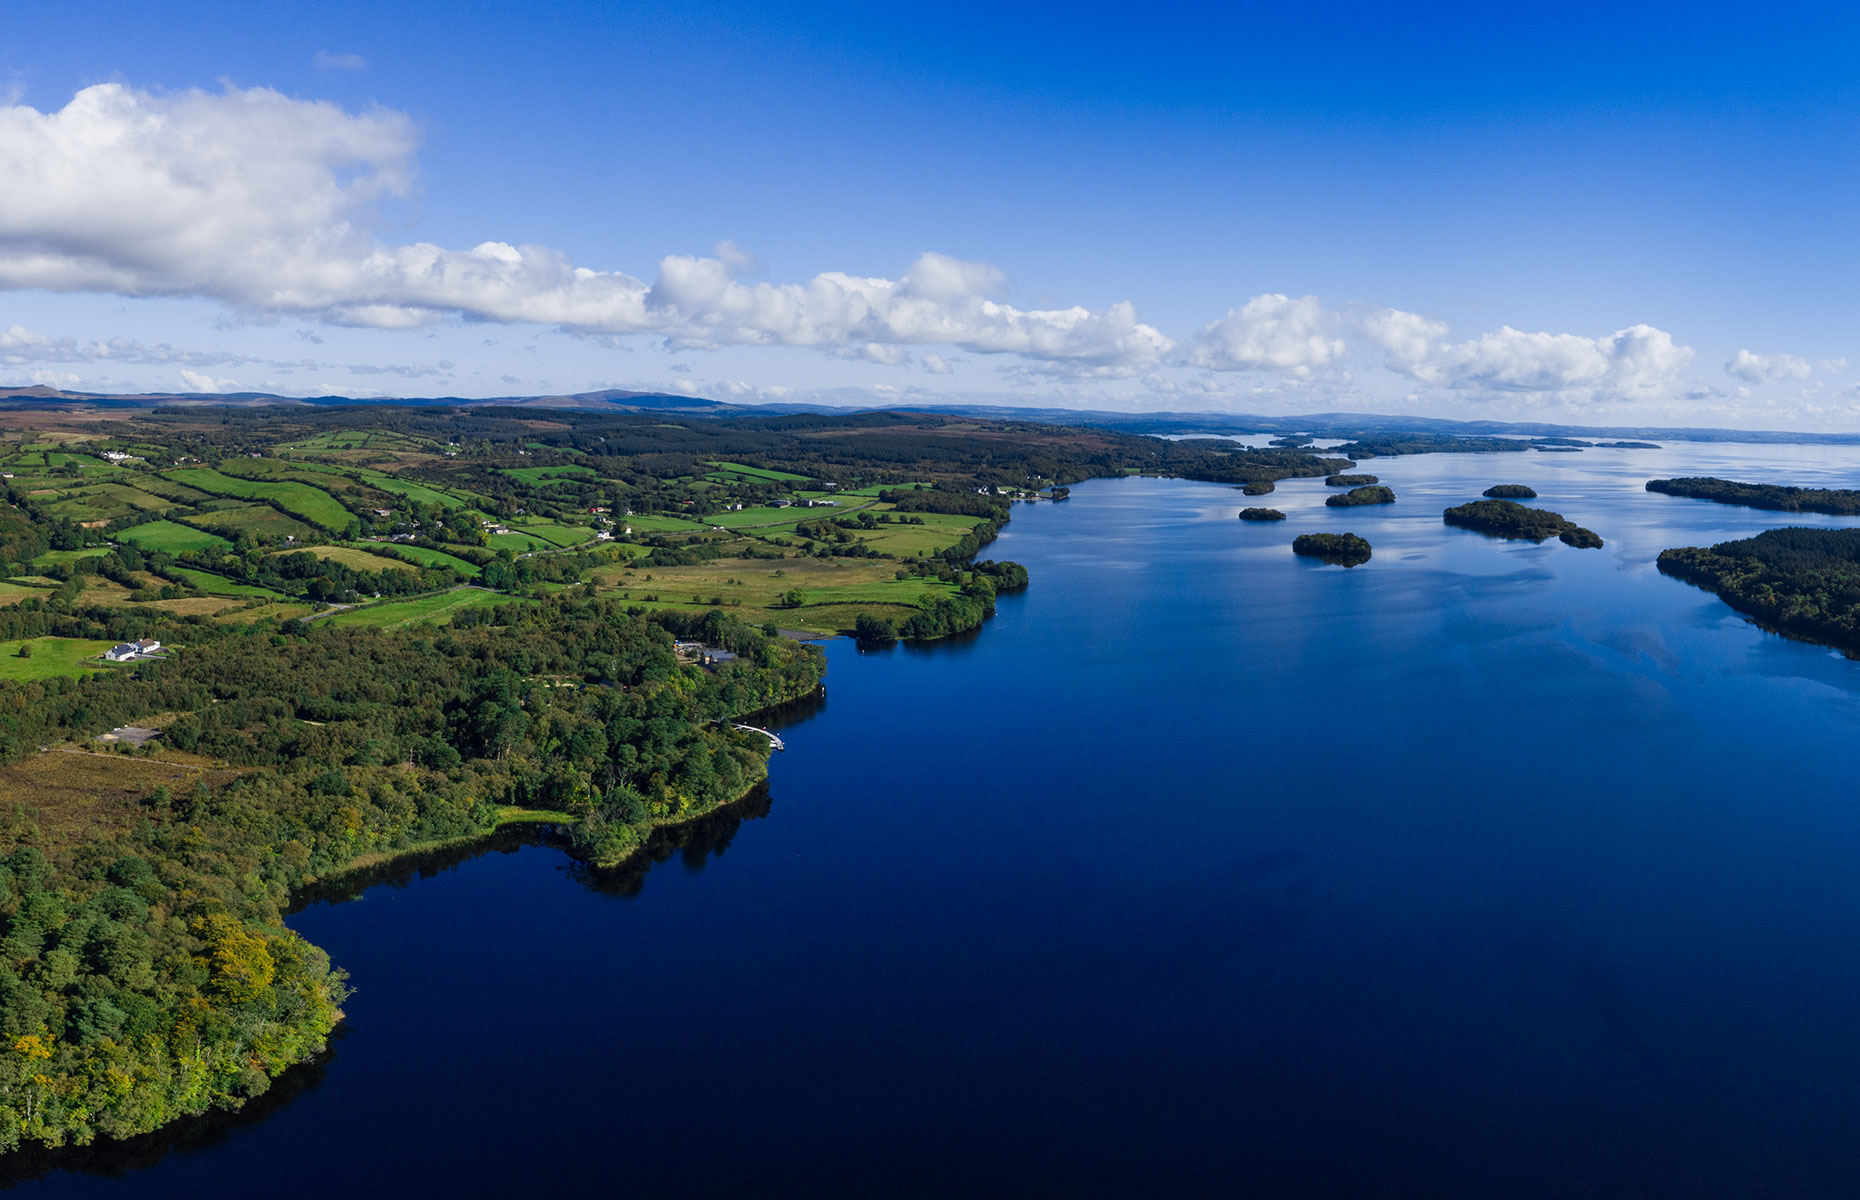 Lough Erne, Northern Island (Image: ianmitchinson/Shutterstock)